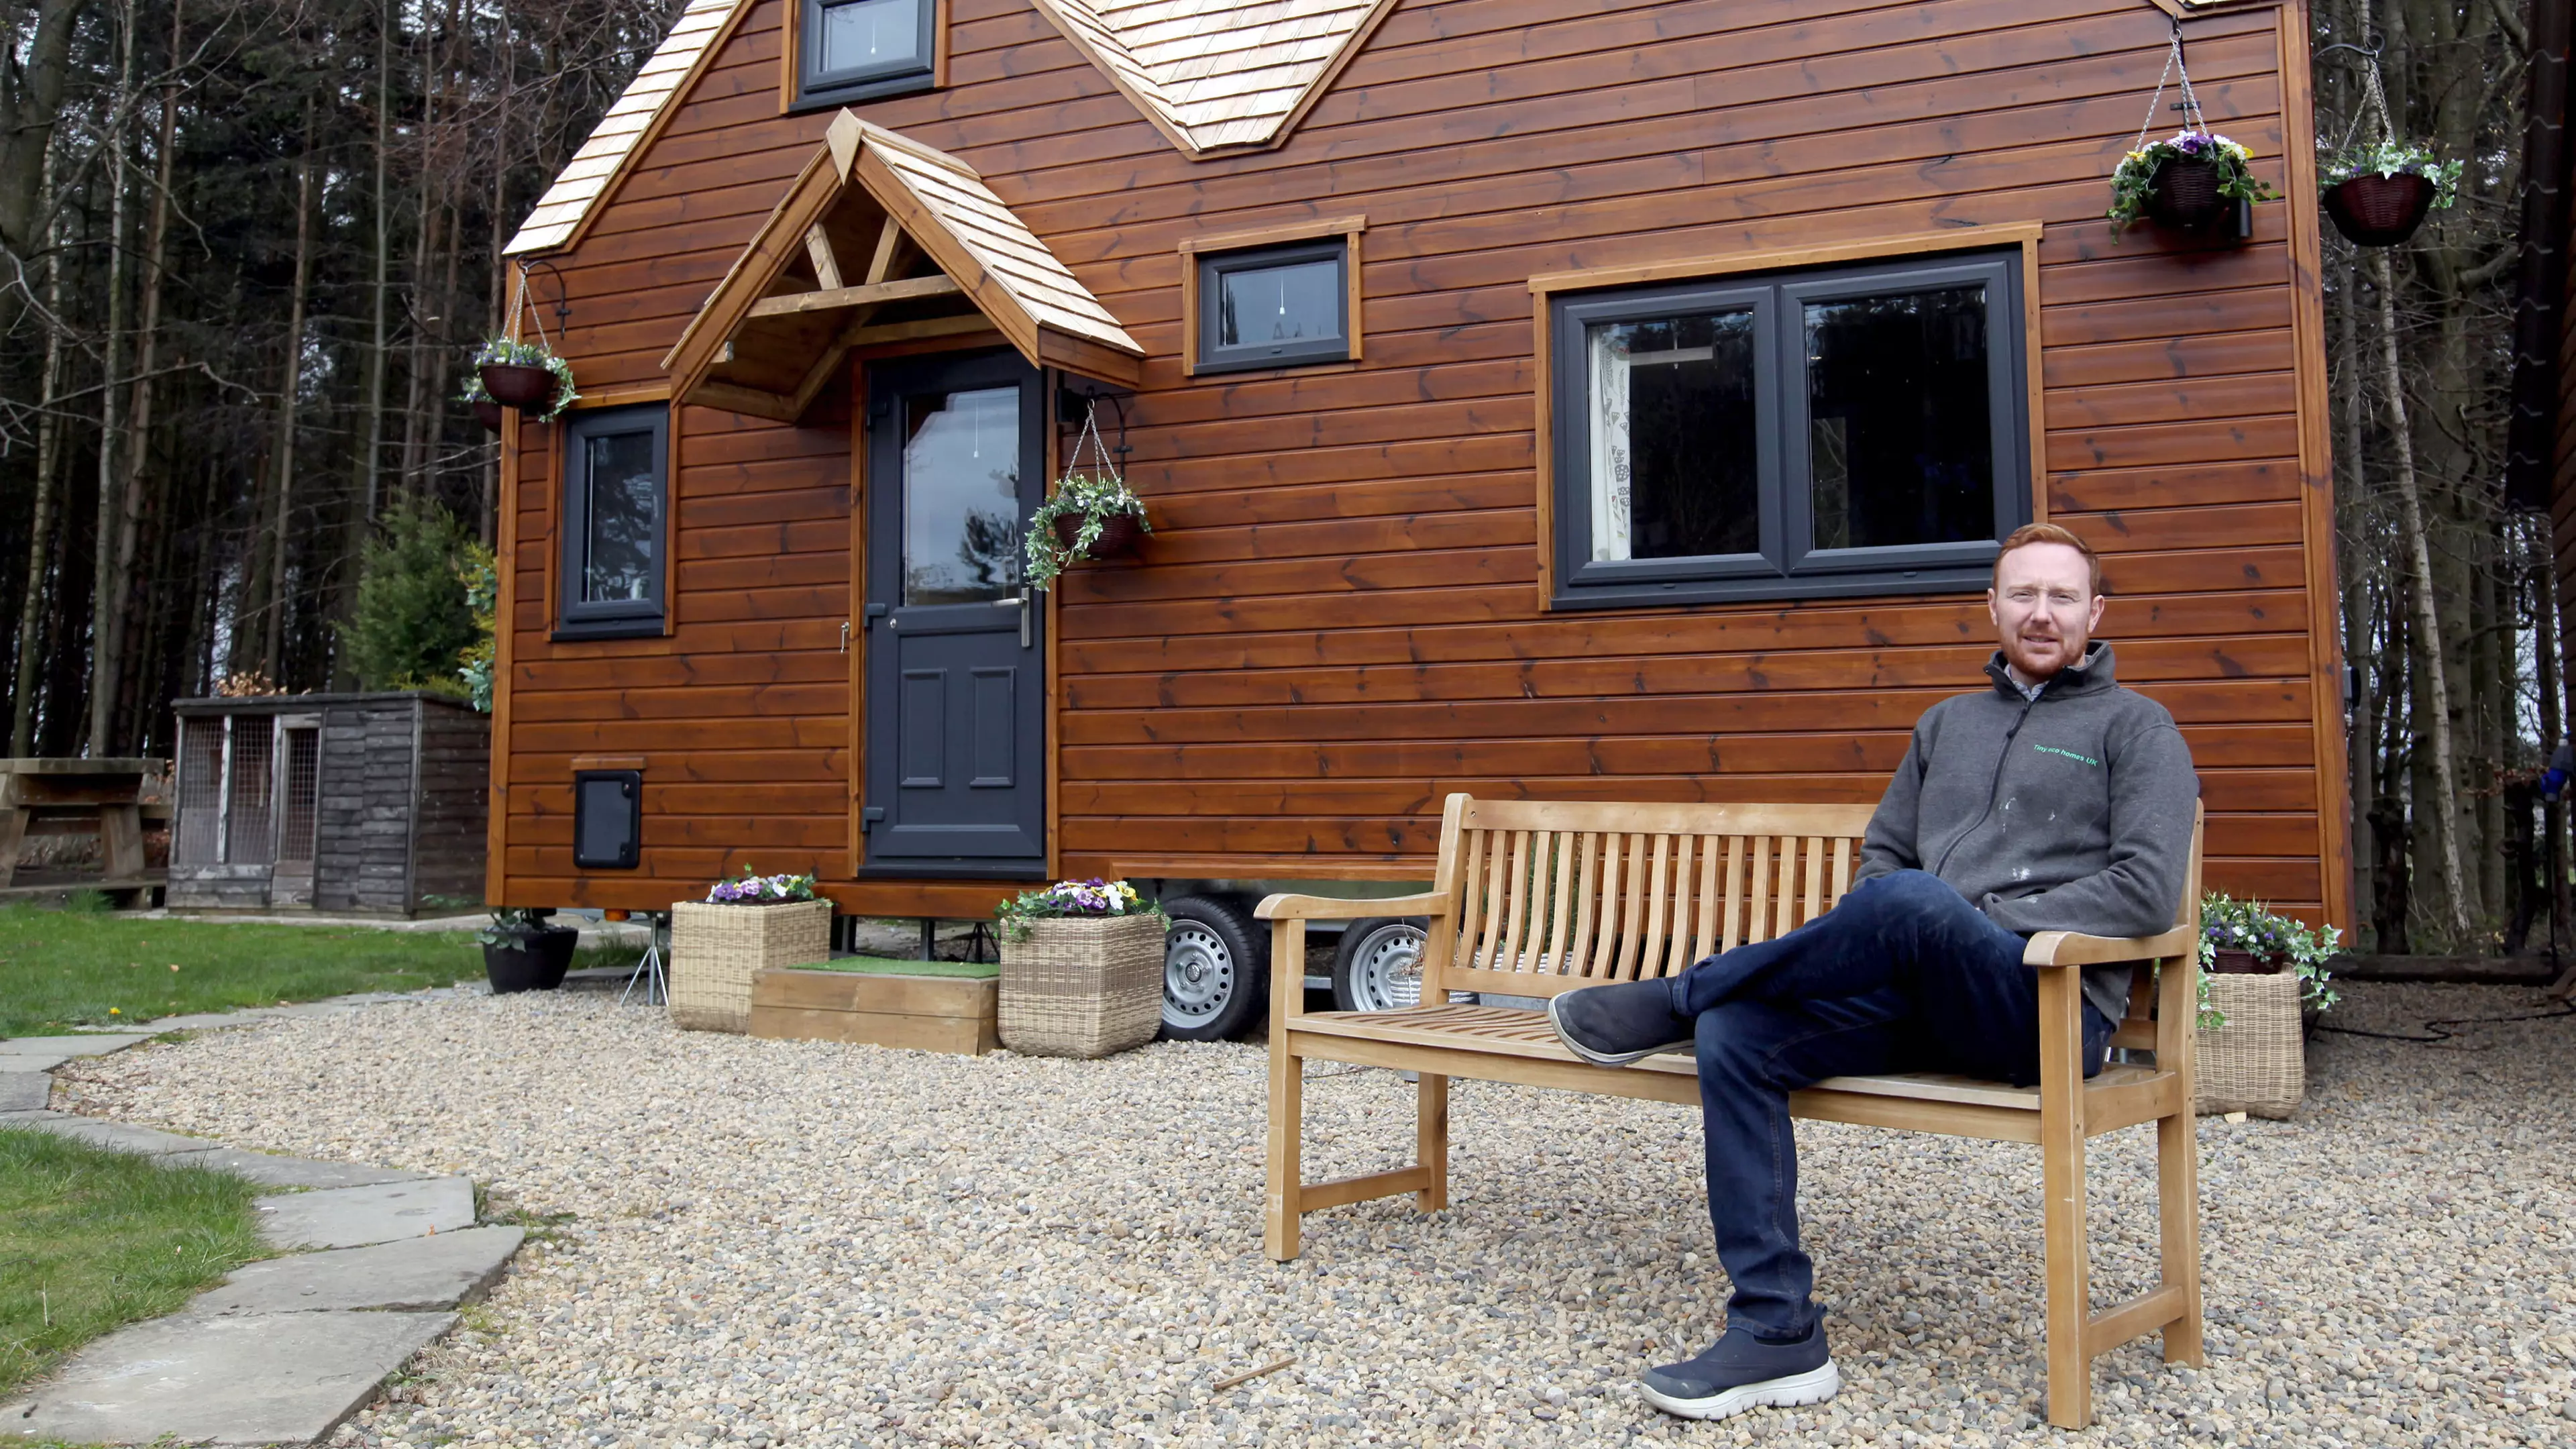 Man Saves £1,000 Each Month By Living In Self-Built 'Eco Home'